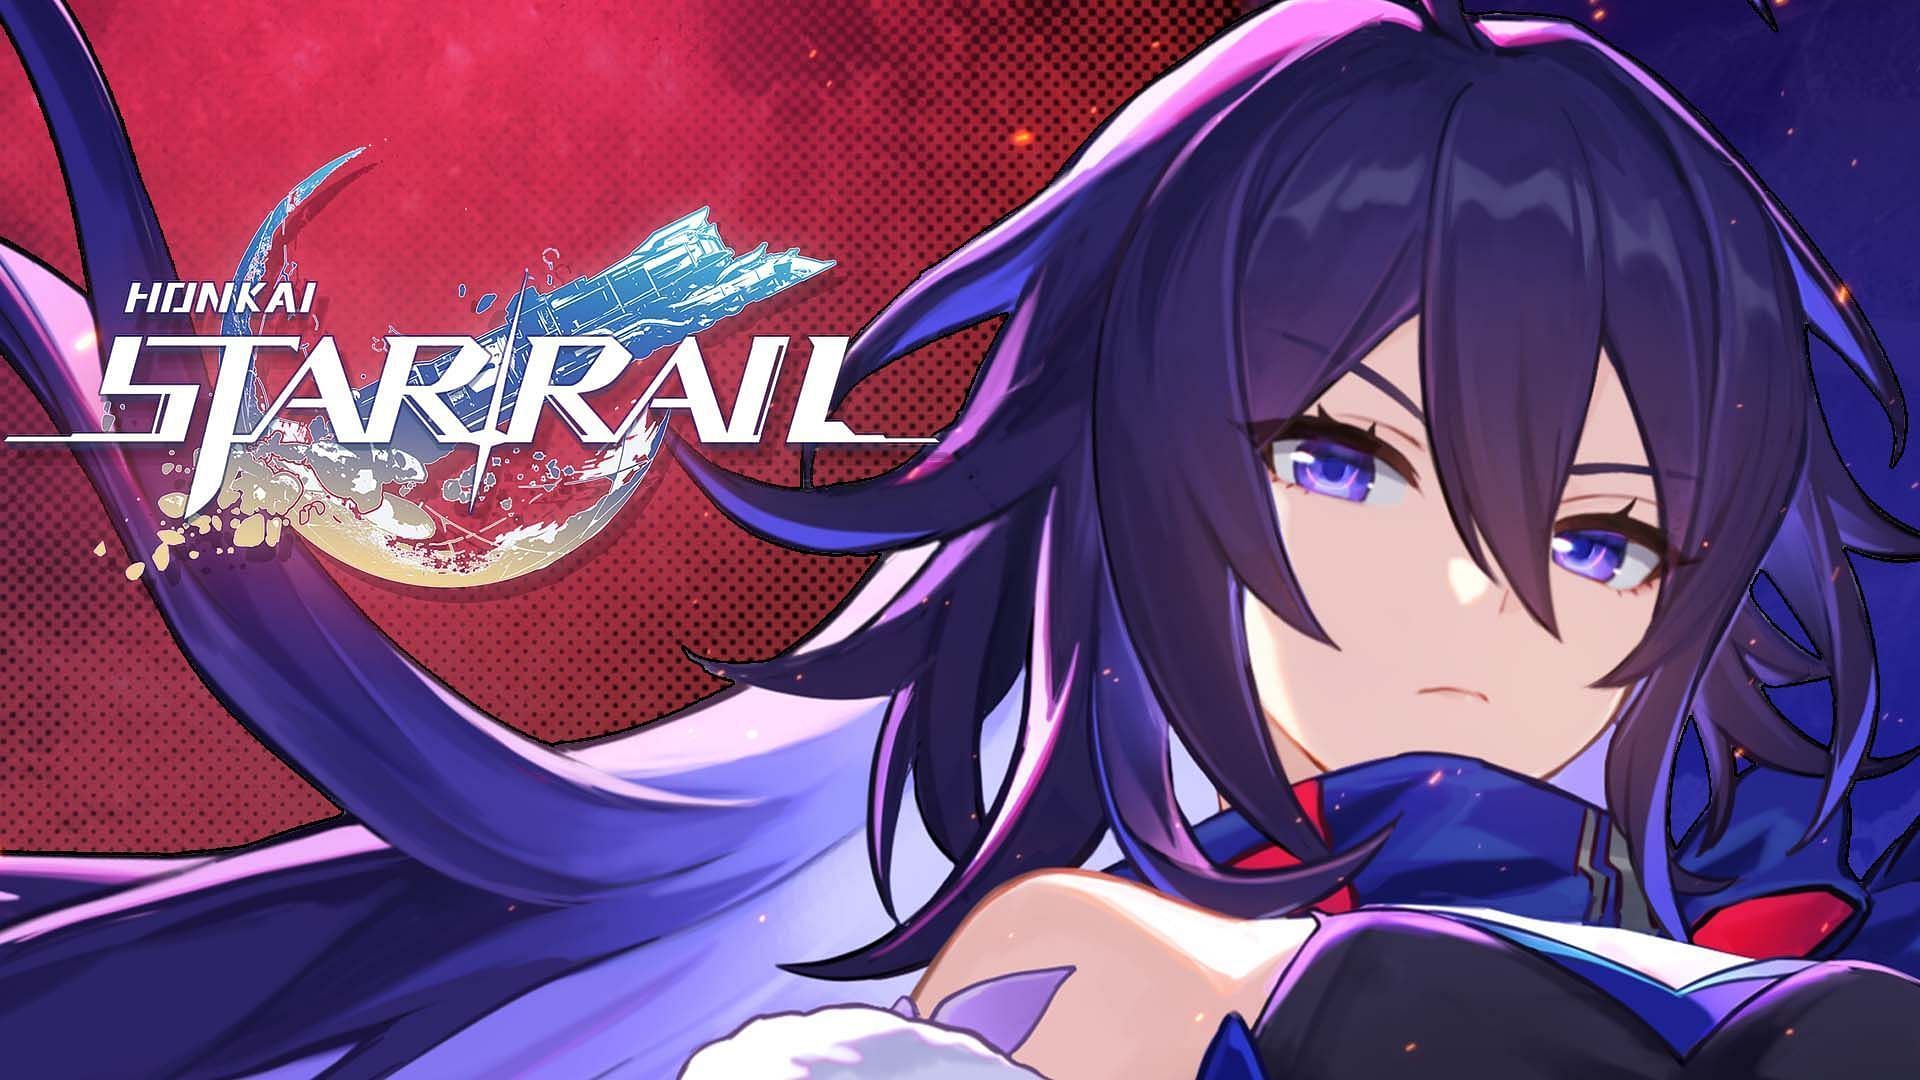 Honkai Star Rail 1.4 update: Release date, banners, events & more